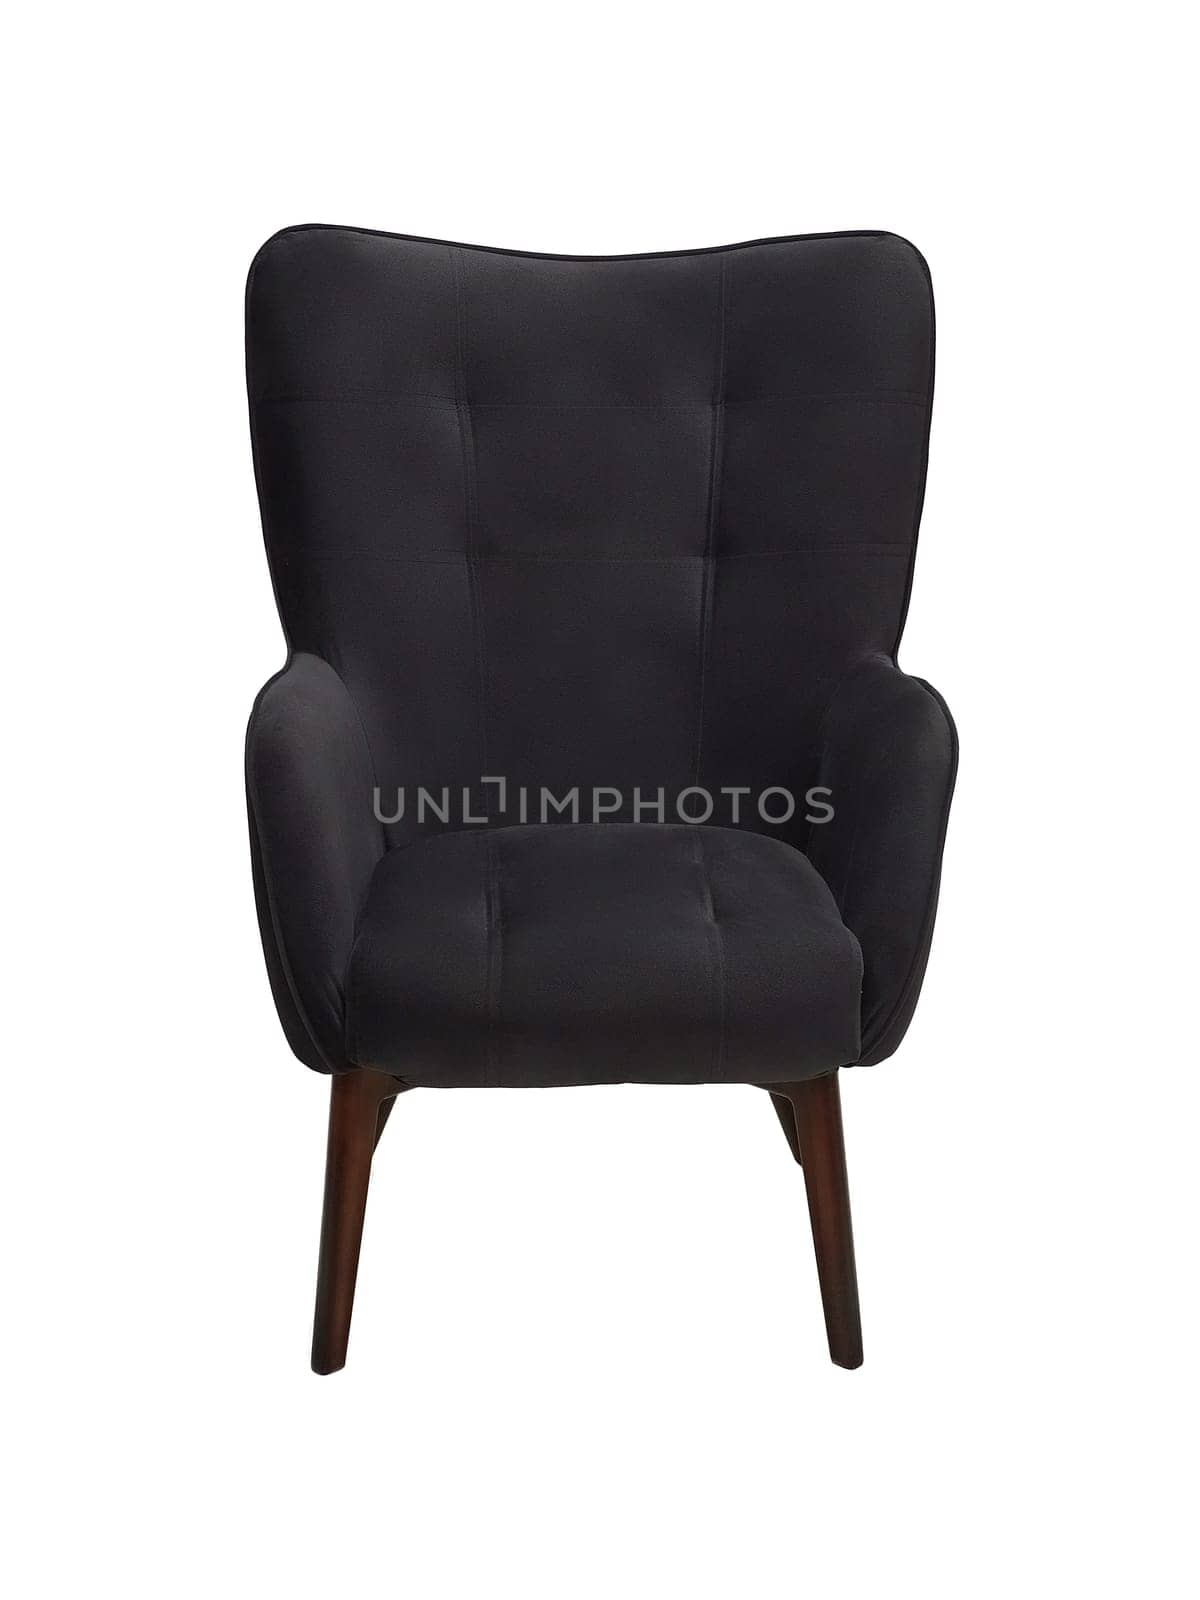 modern black fabric armchair with wooden legs isolated on white background, front view.